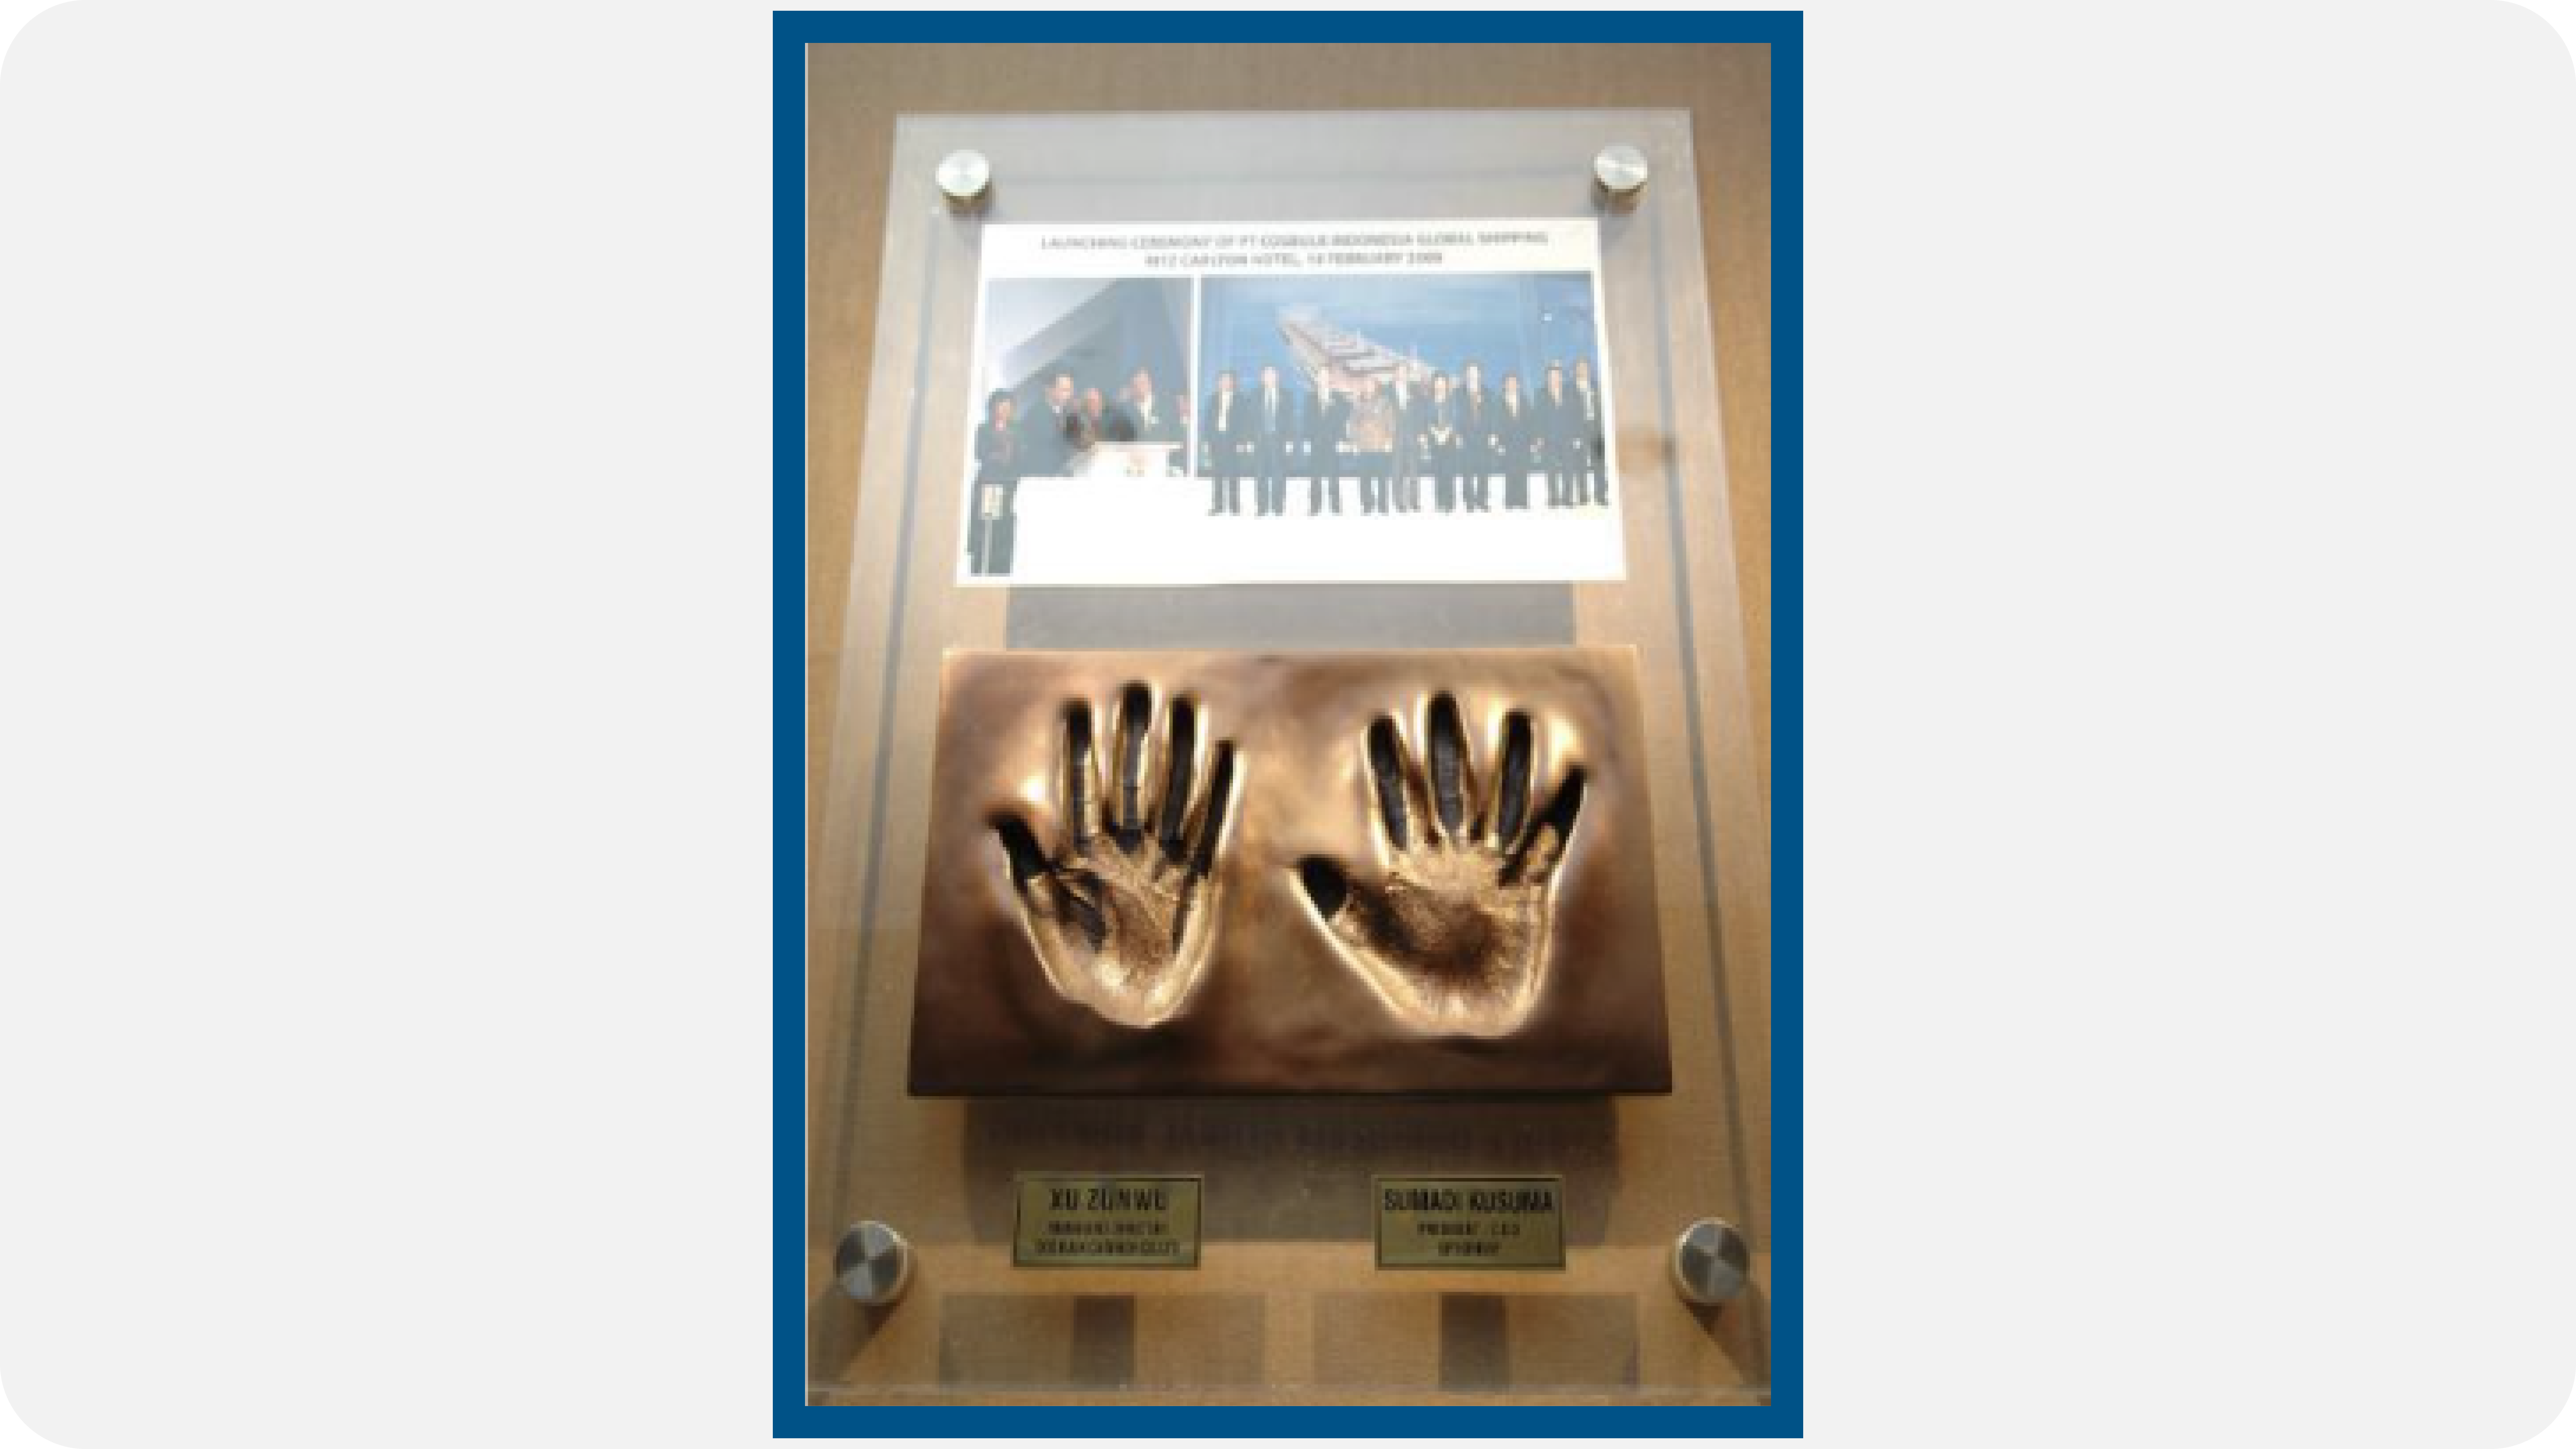 Hand Replica as the Symbol of Collaboration